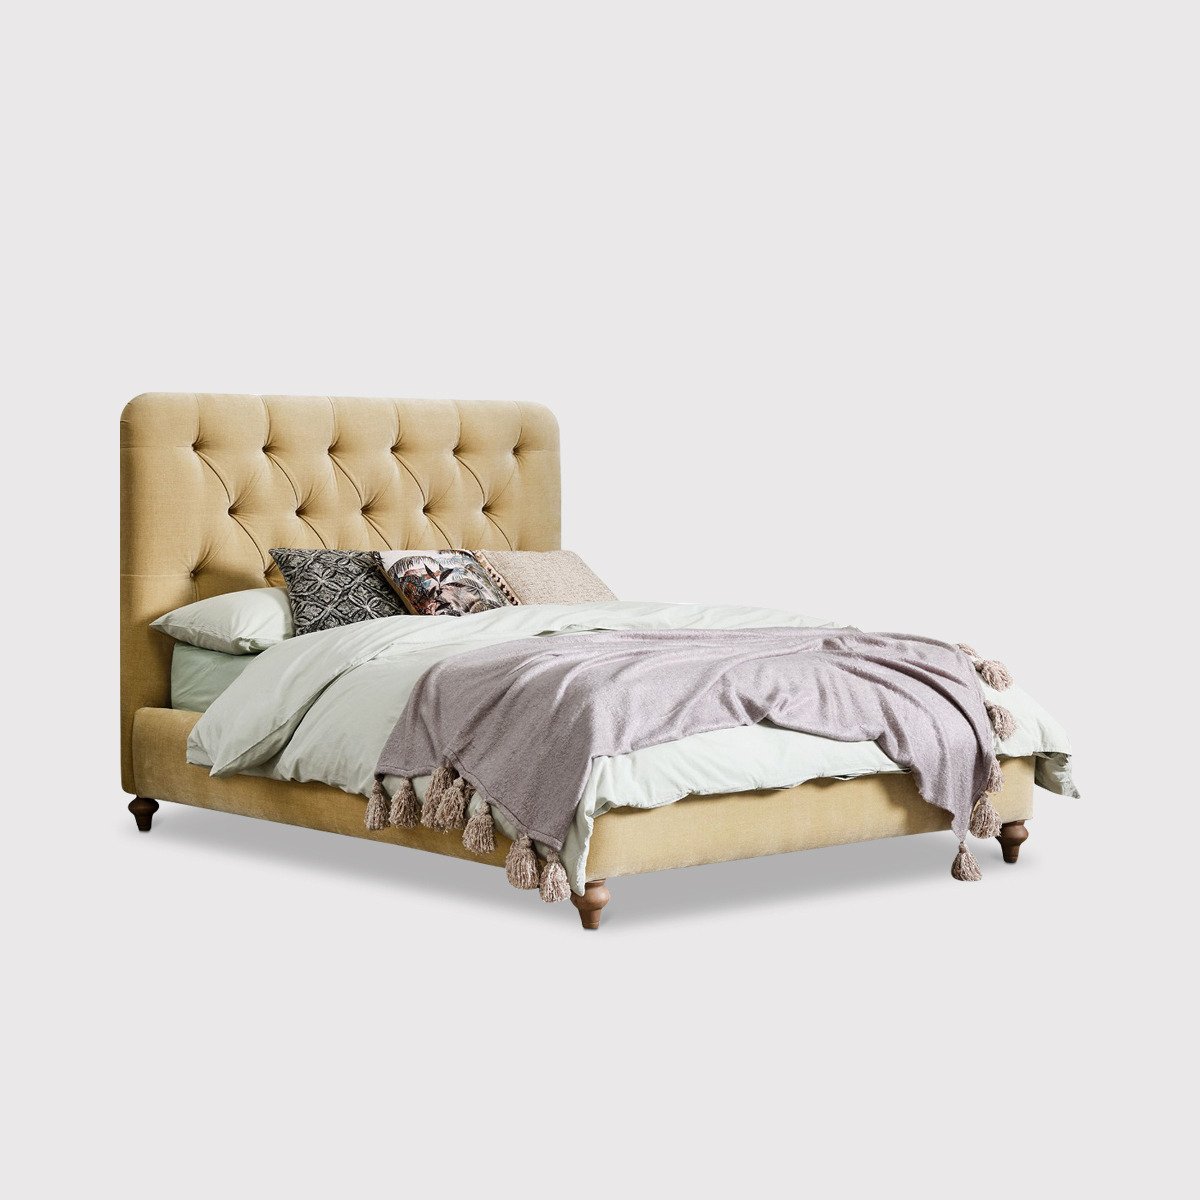 Delphine King Bed Frame, Yellow Fabric - Barker & Stonehouse - image 1